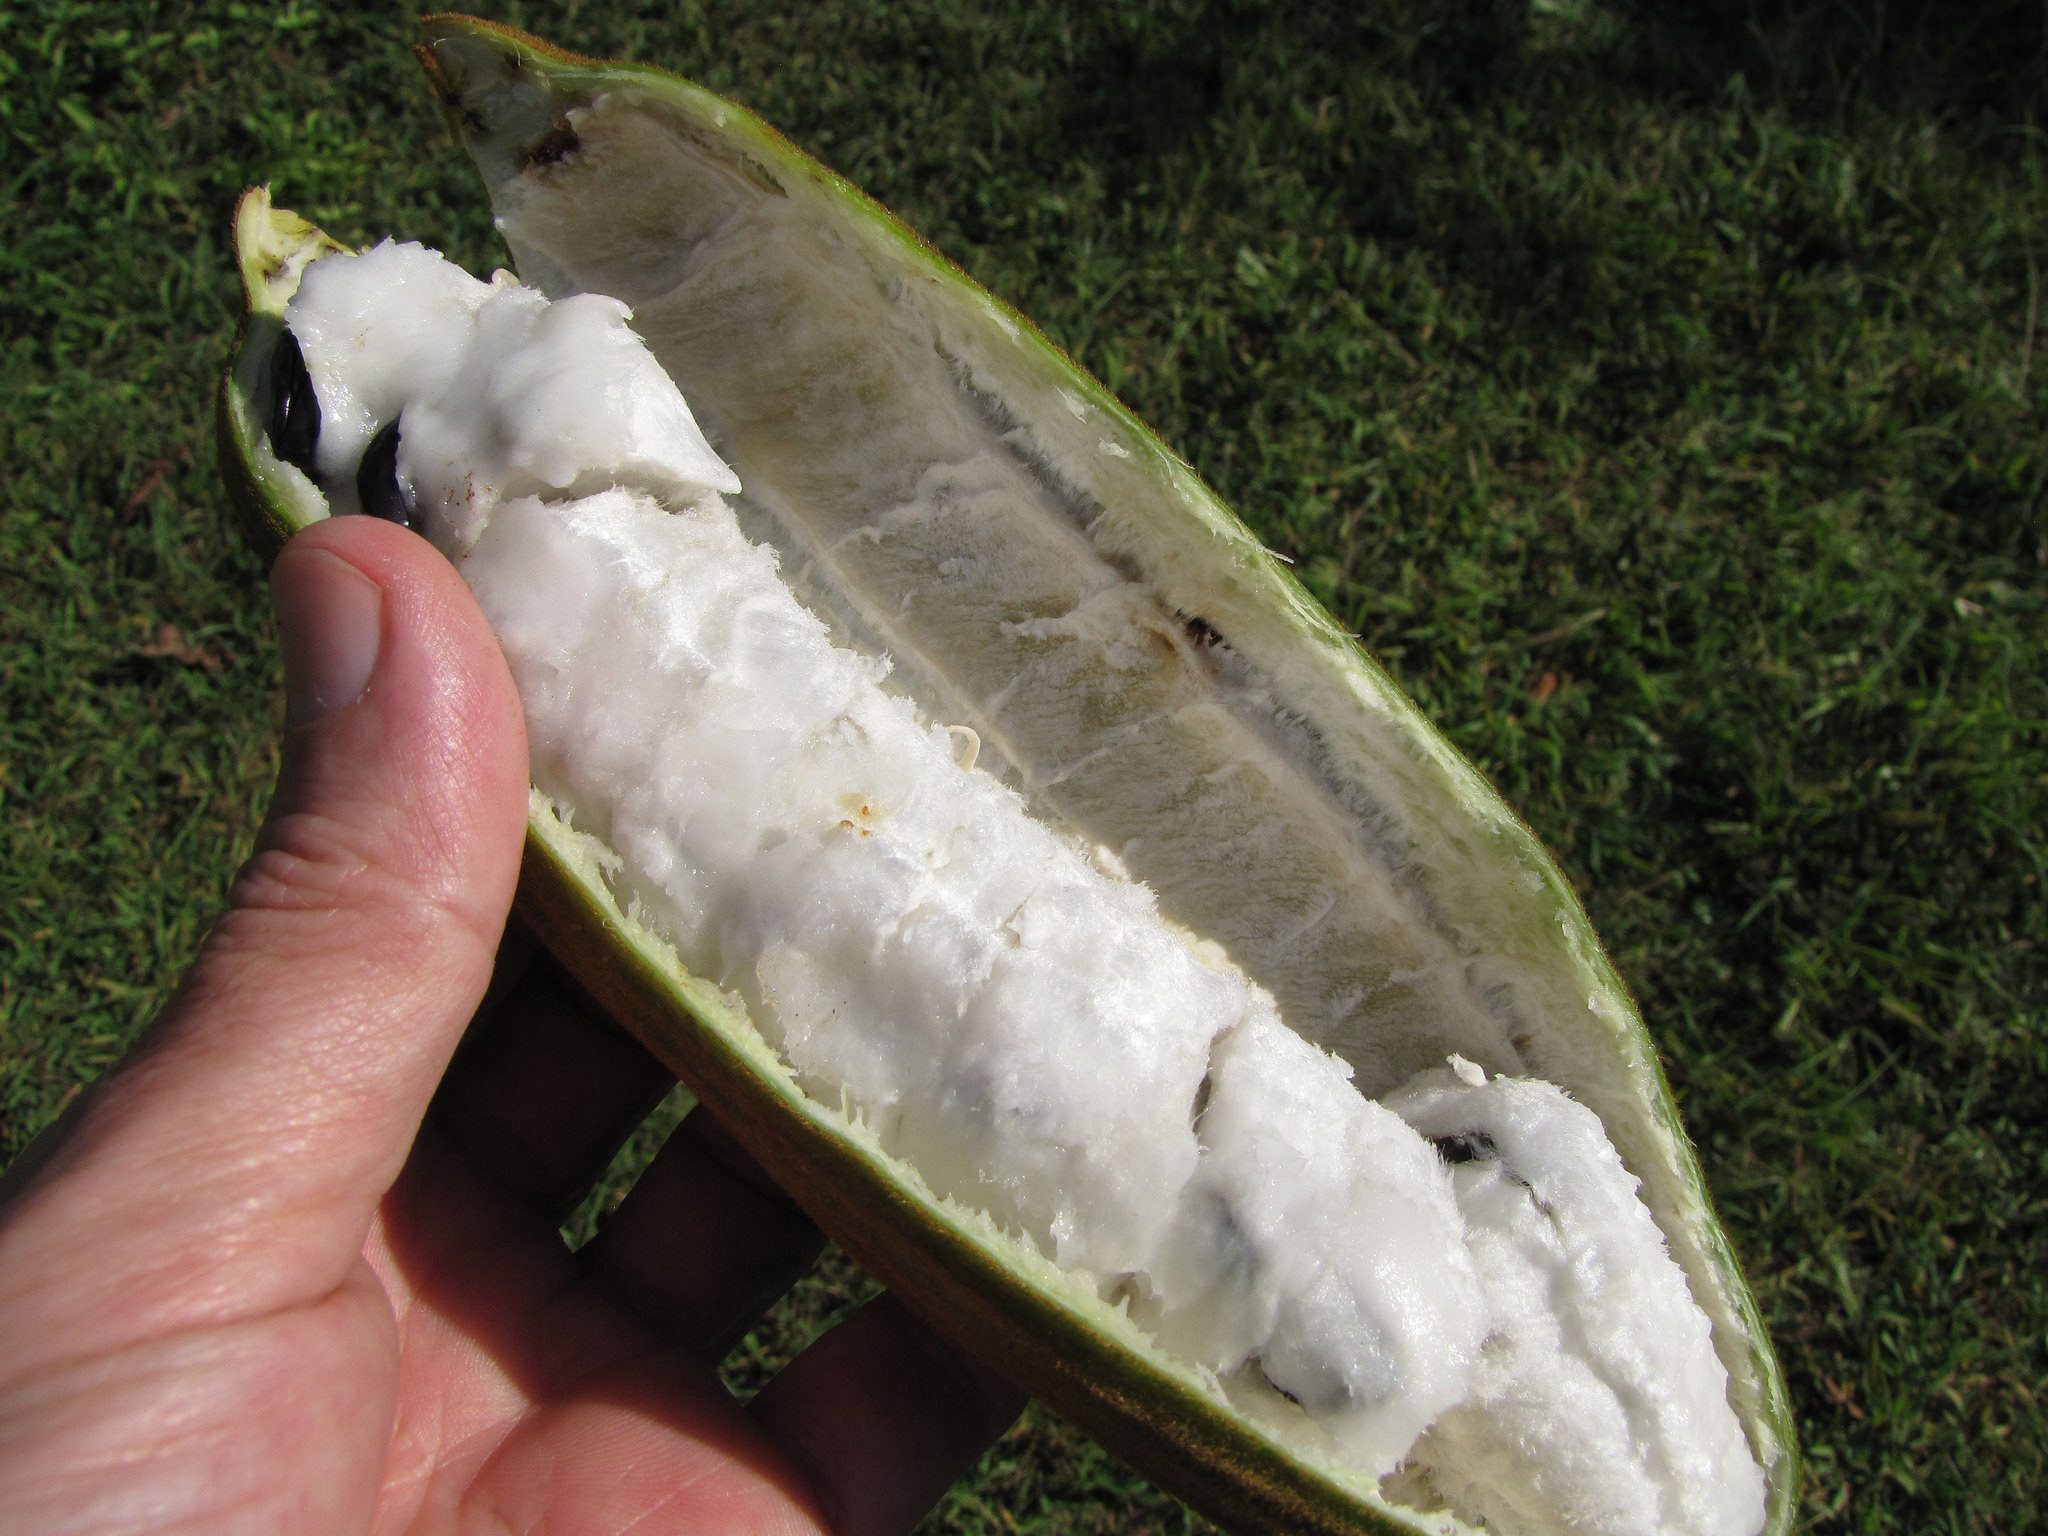 The Inga Trees of South America – Ice Cream that Grows on a Tree